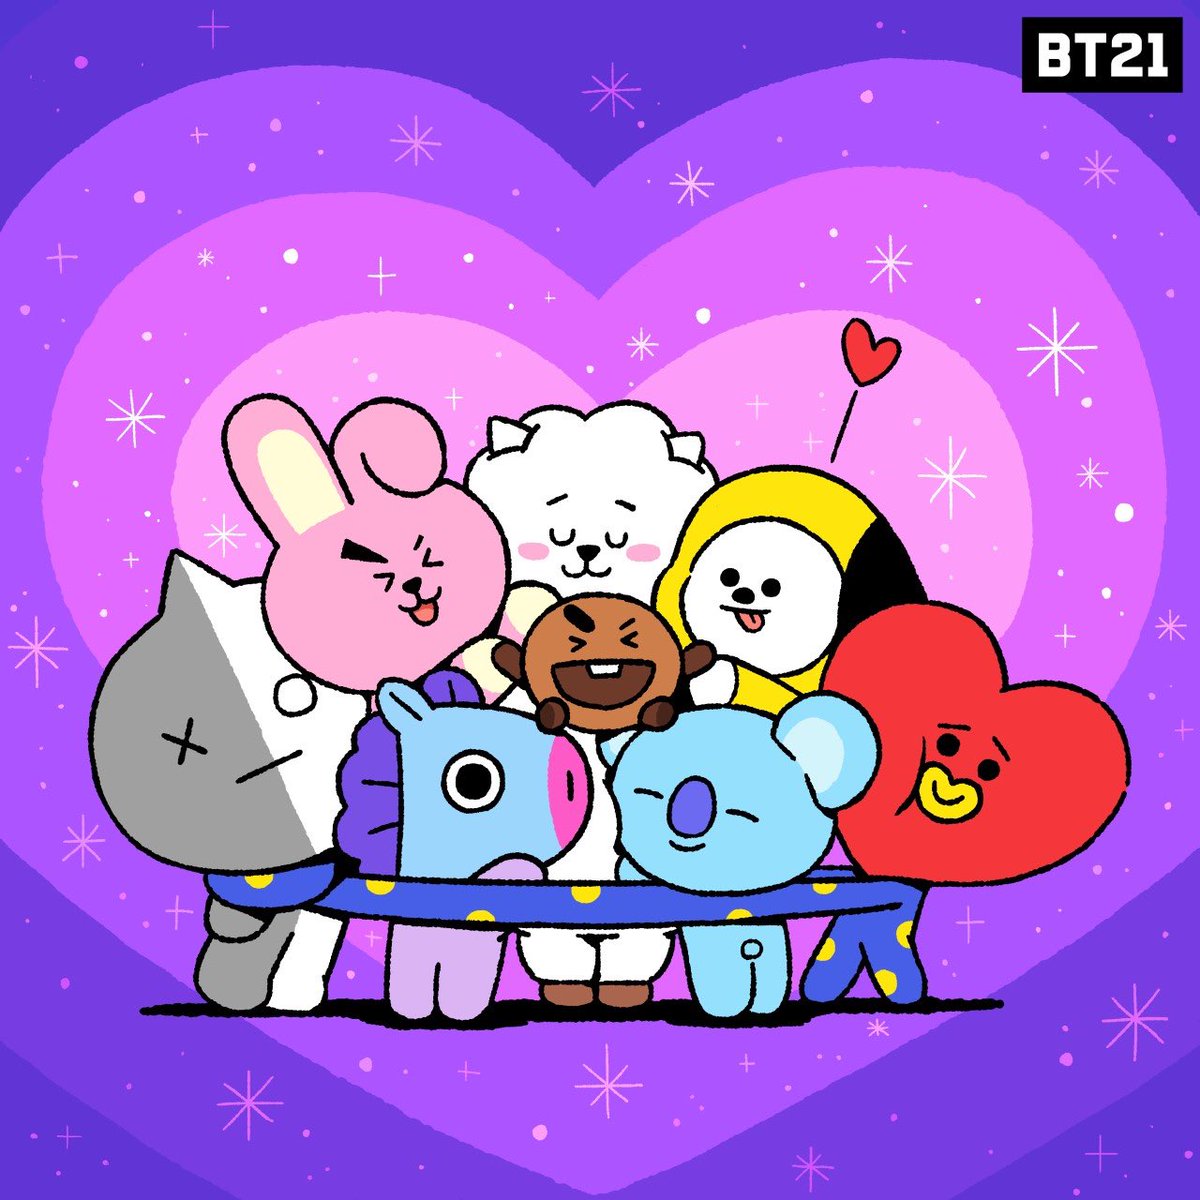 No matter what, 
we're always here for you🥰

#StaySafe #StayWell #BeHappy #SHOOKY #WeLoveYou #BT21